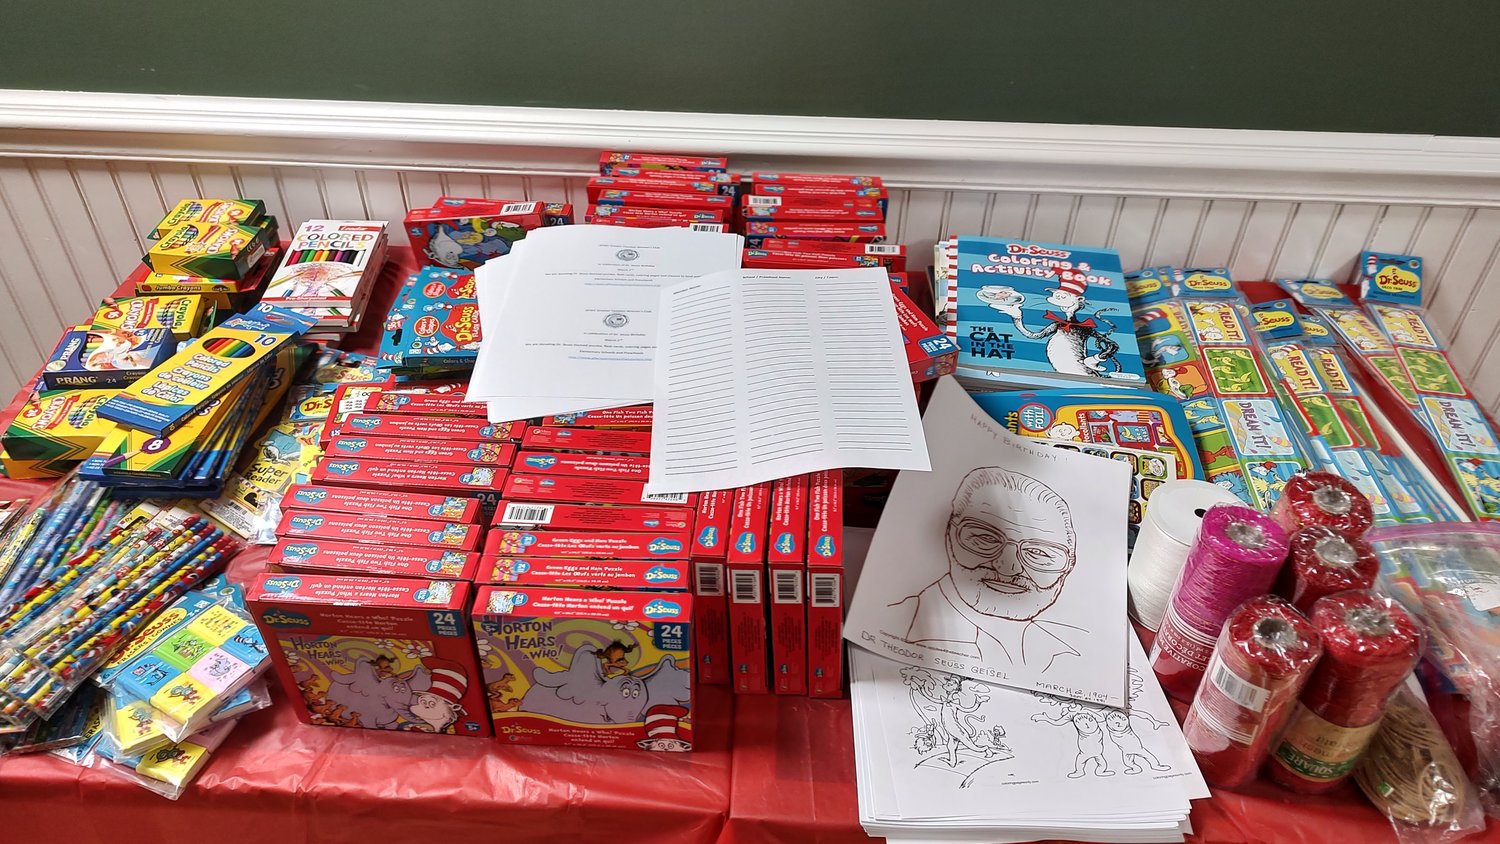 Dr. Suess items to be packaged.